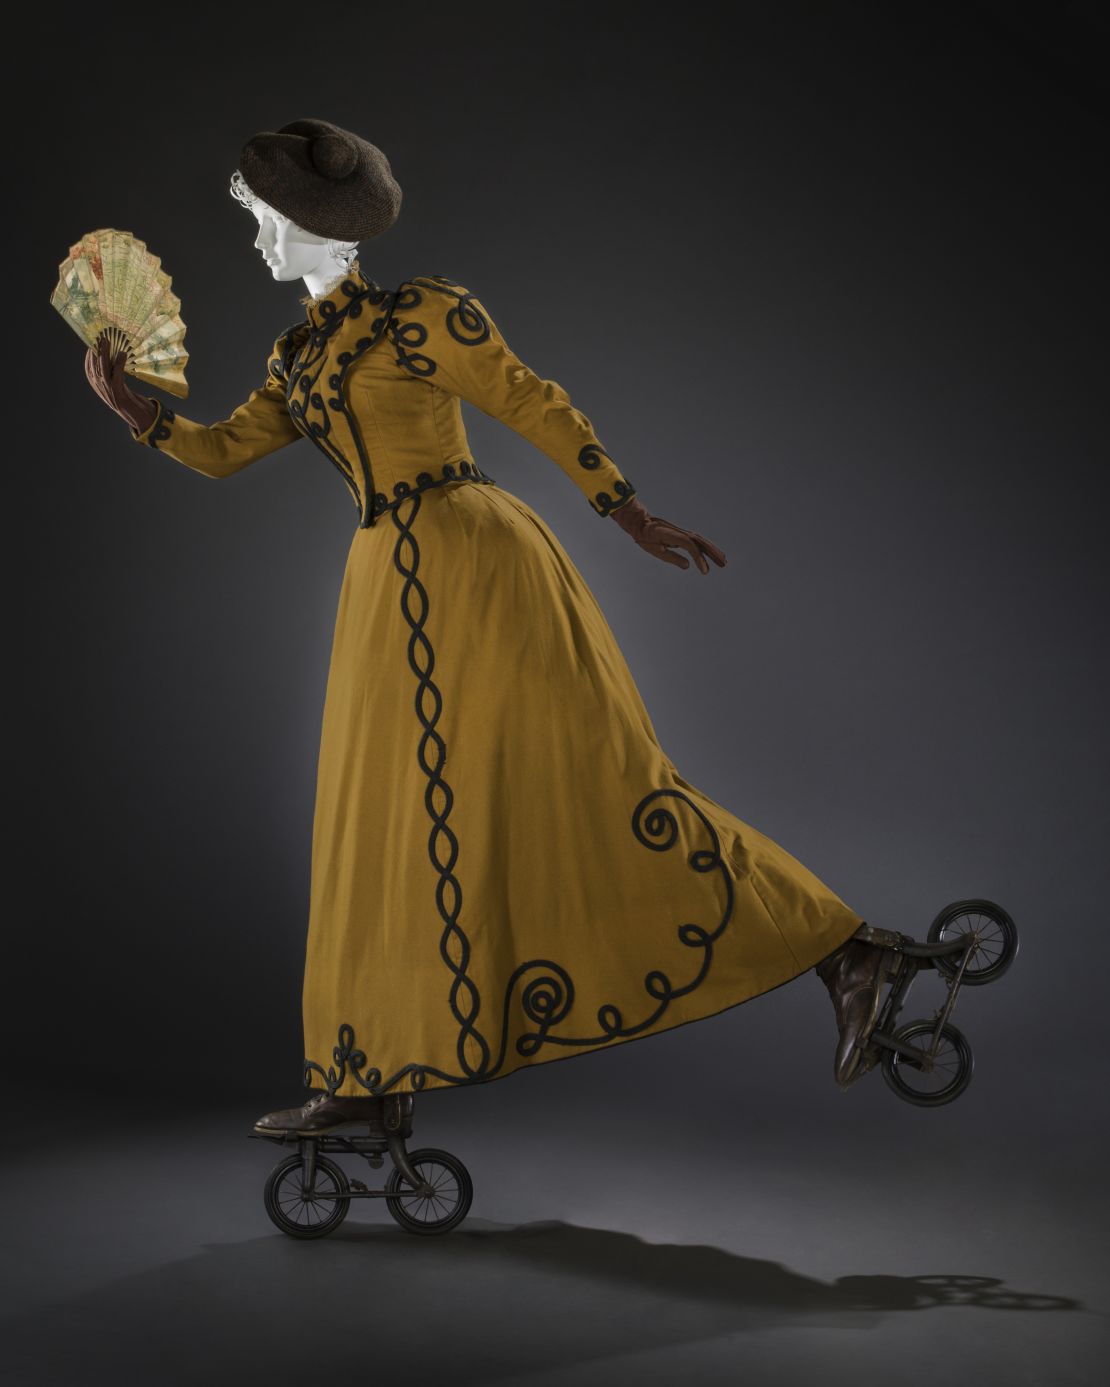 An inline skating outfit from the 1890s.